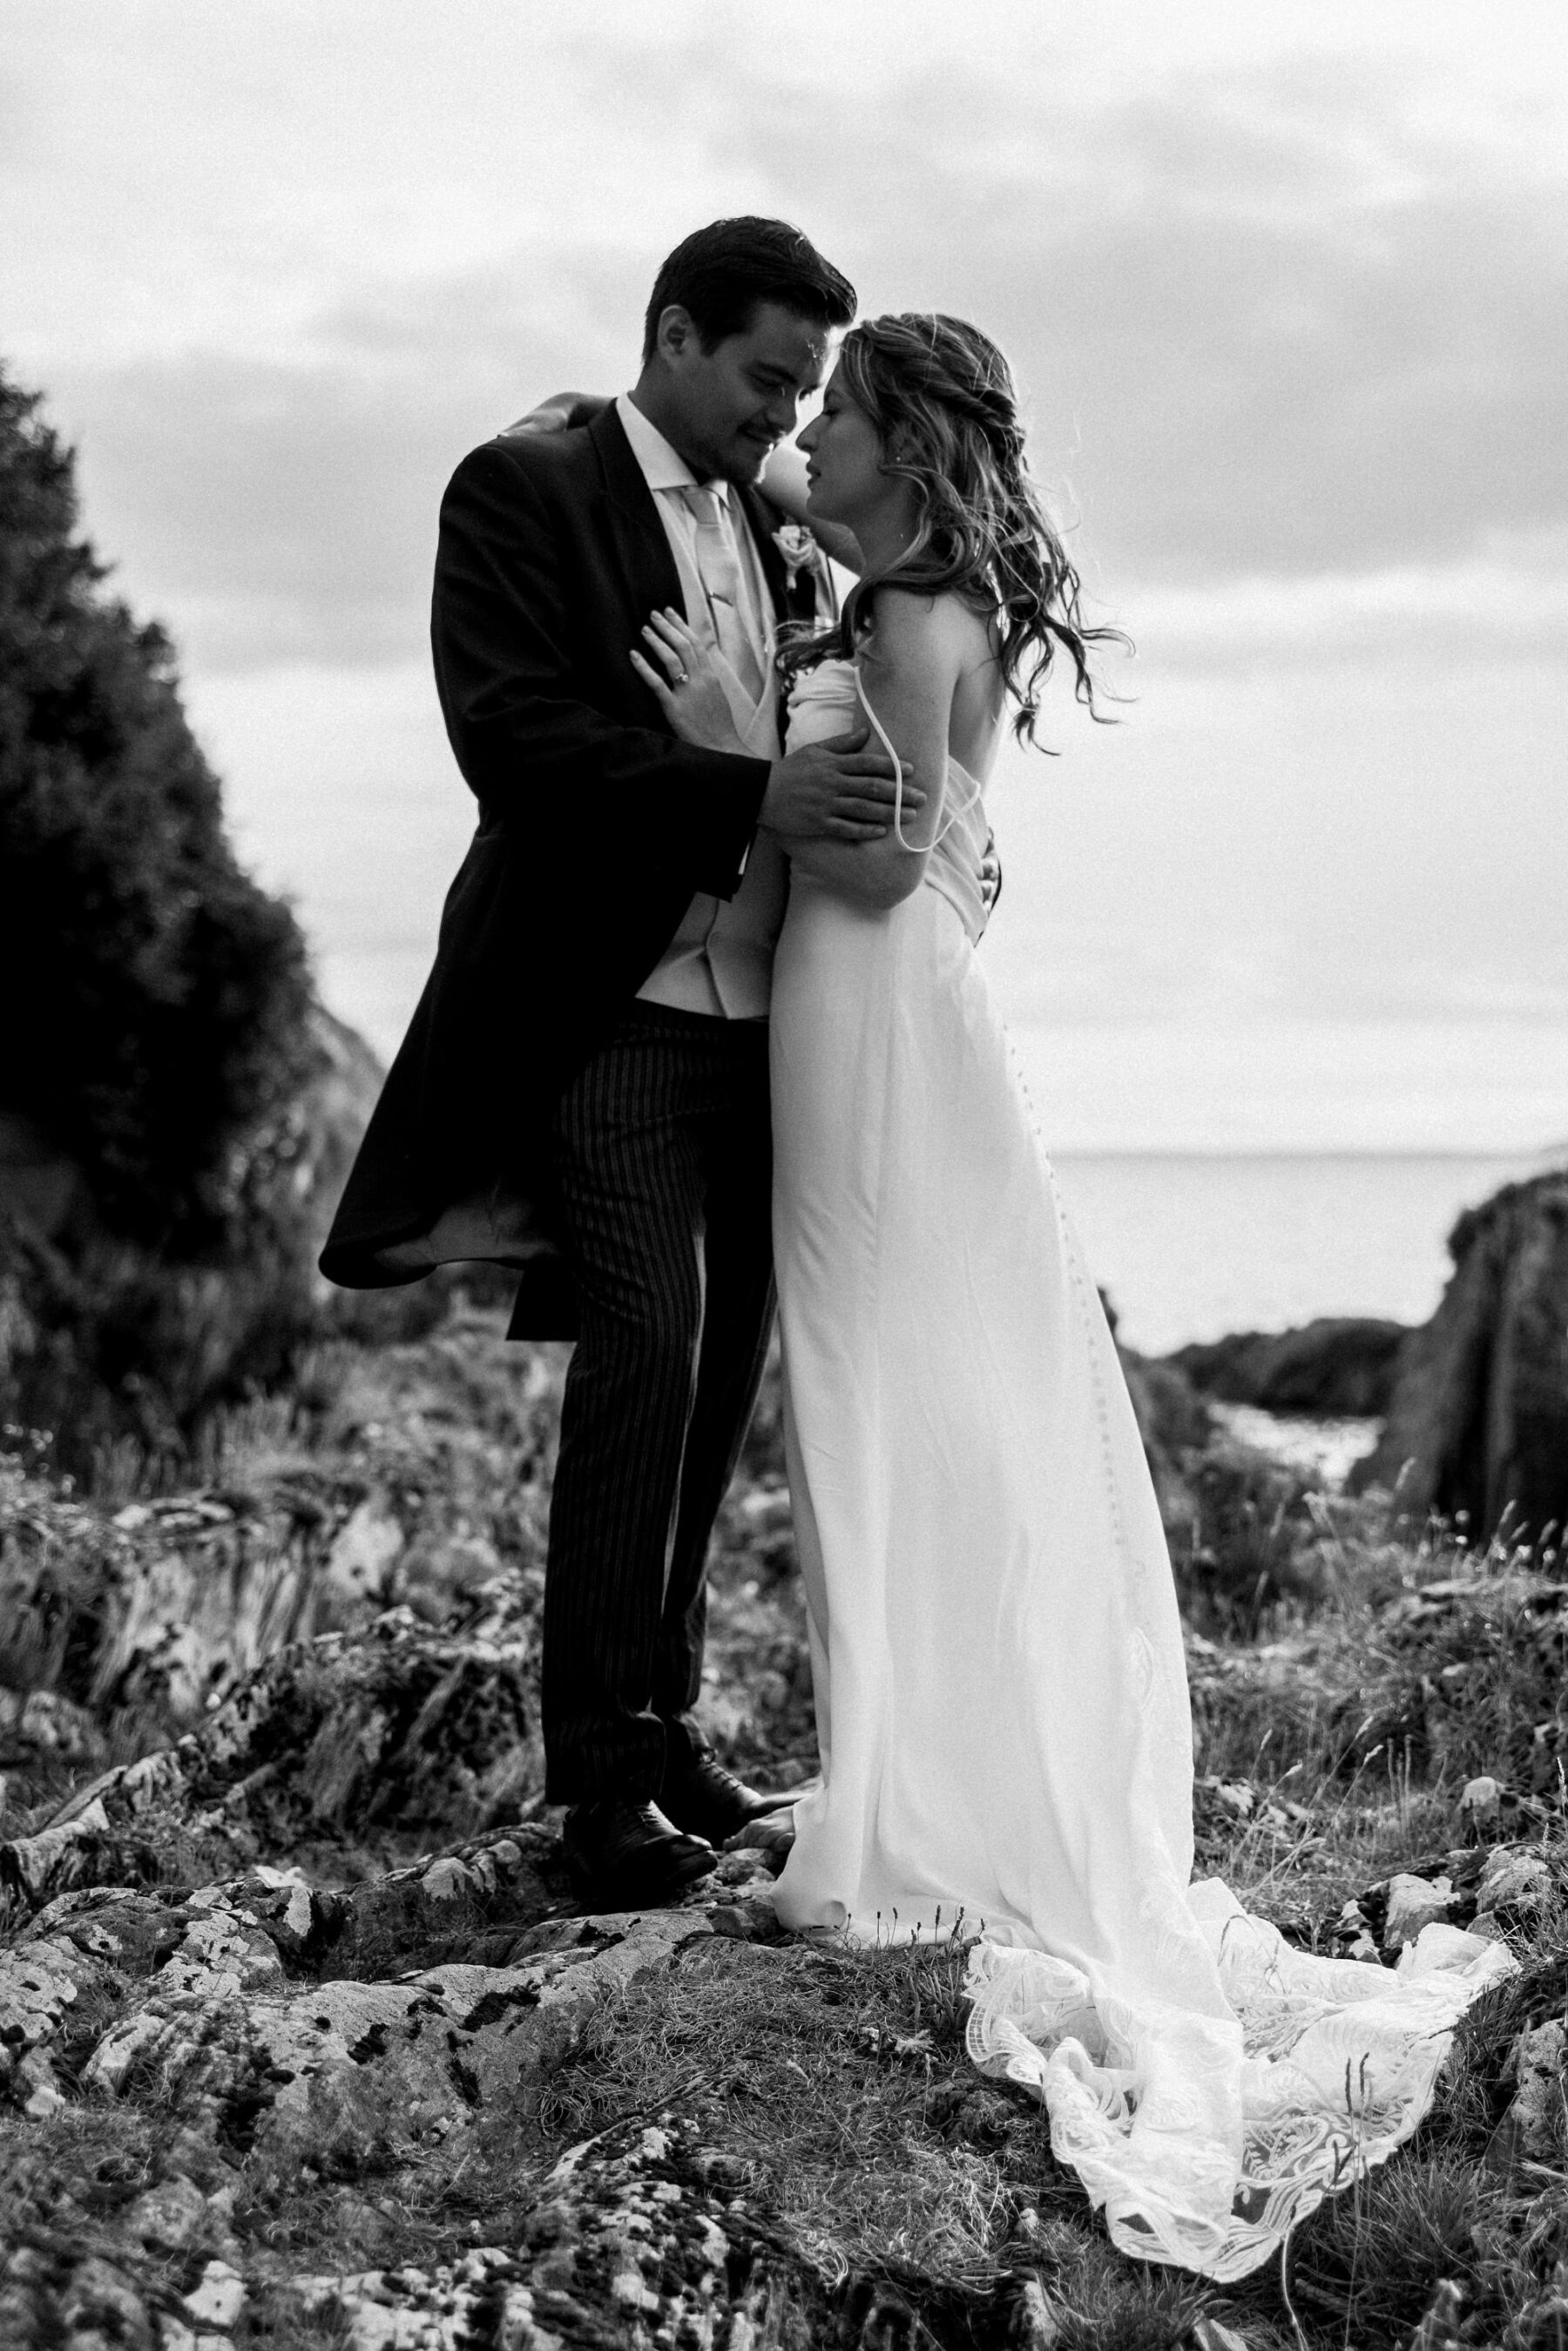 Black and white shot of bride and groom in loving embrace